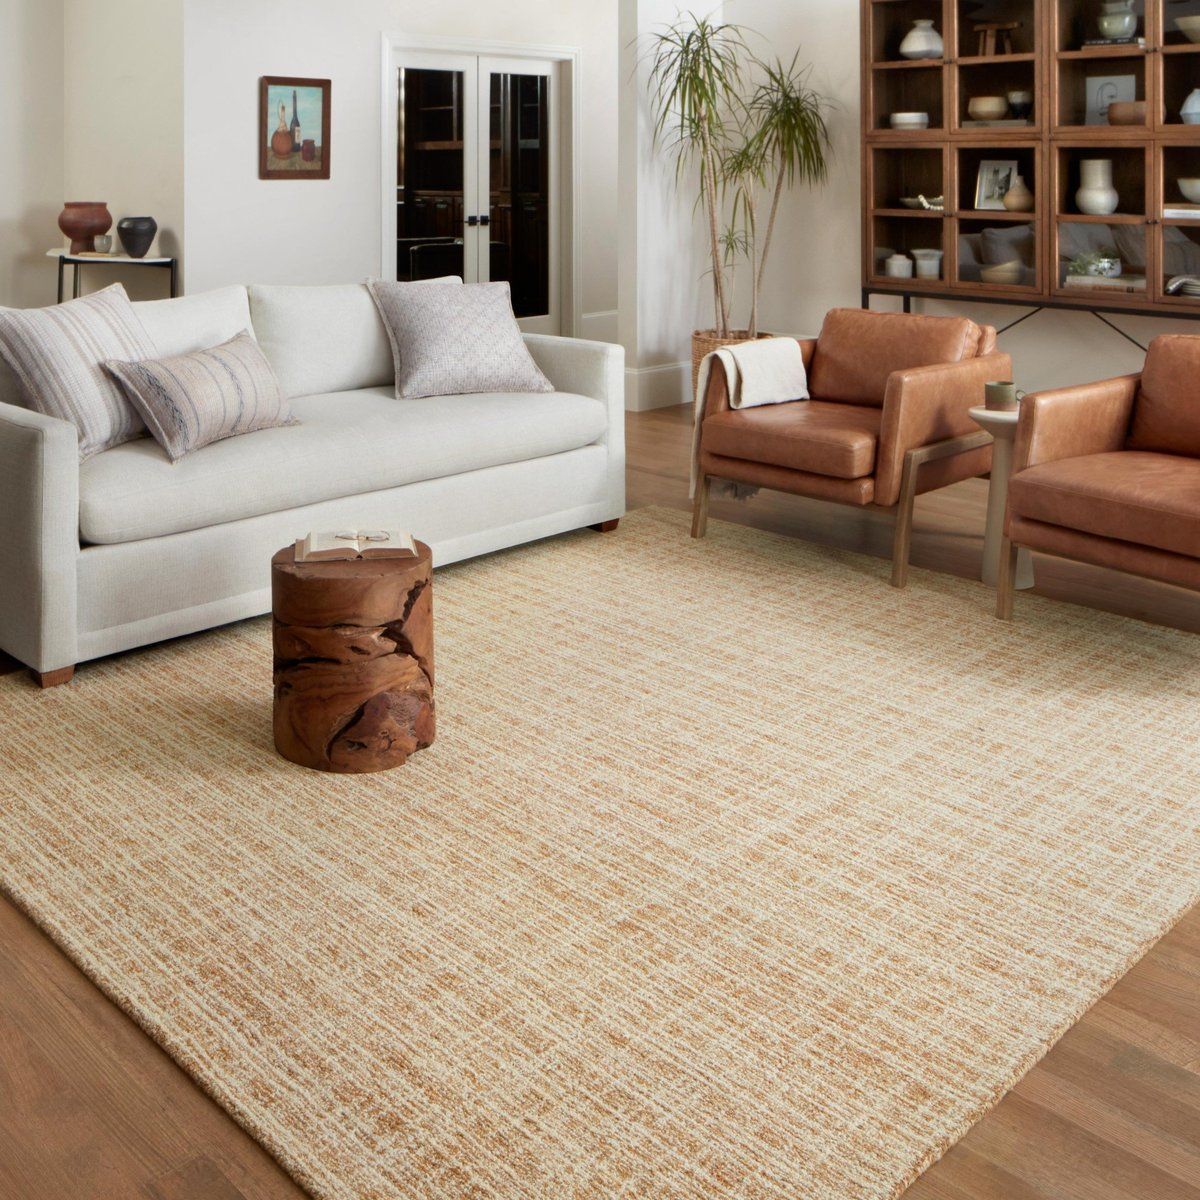 Chris Loves Julia x Loloi Polly POL-03 Modern Wool Area Rugs | Rugs Direct | Rugs Direct